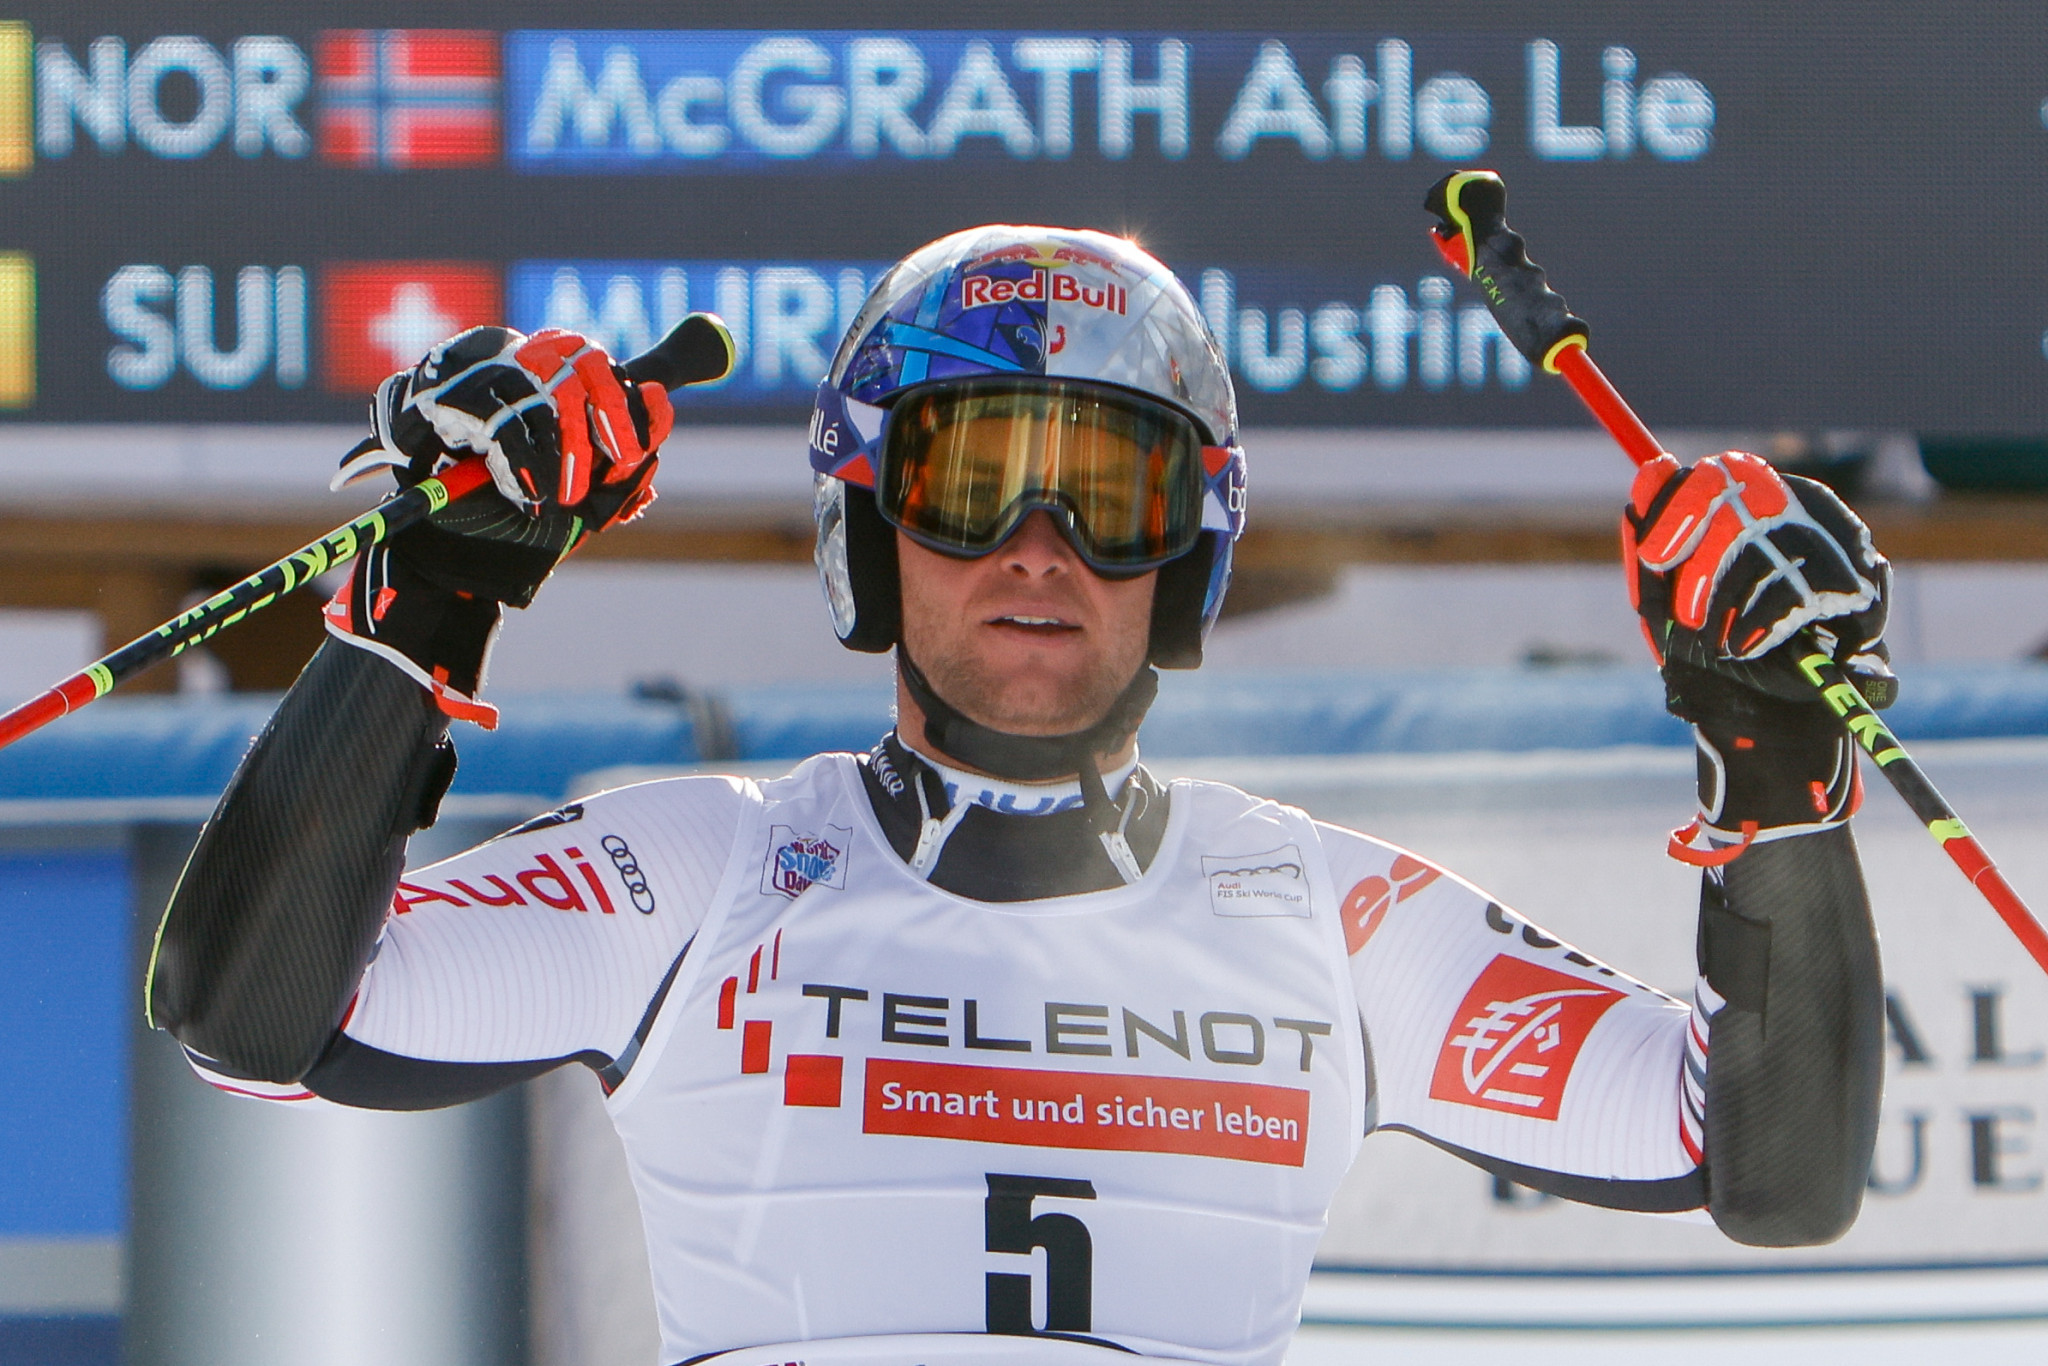 Pinturault returns to FIS Alpine Ski World Cup with giant slalom victory in Italy